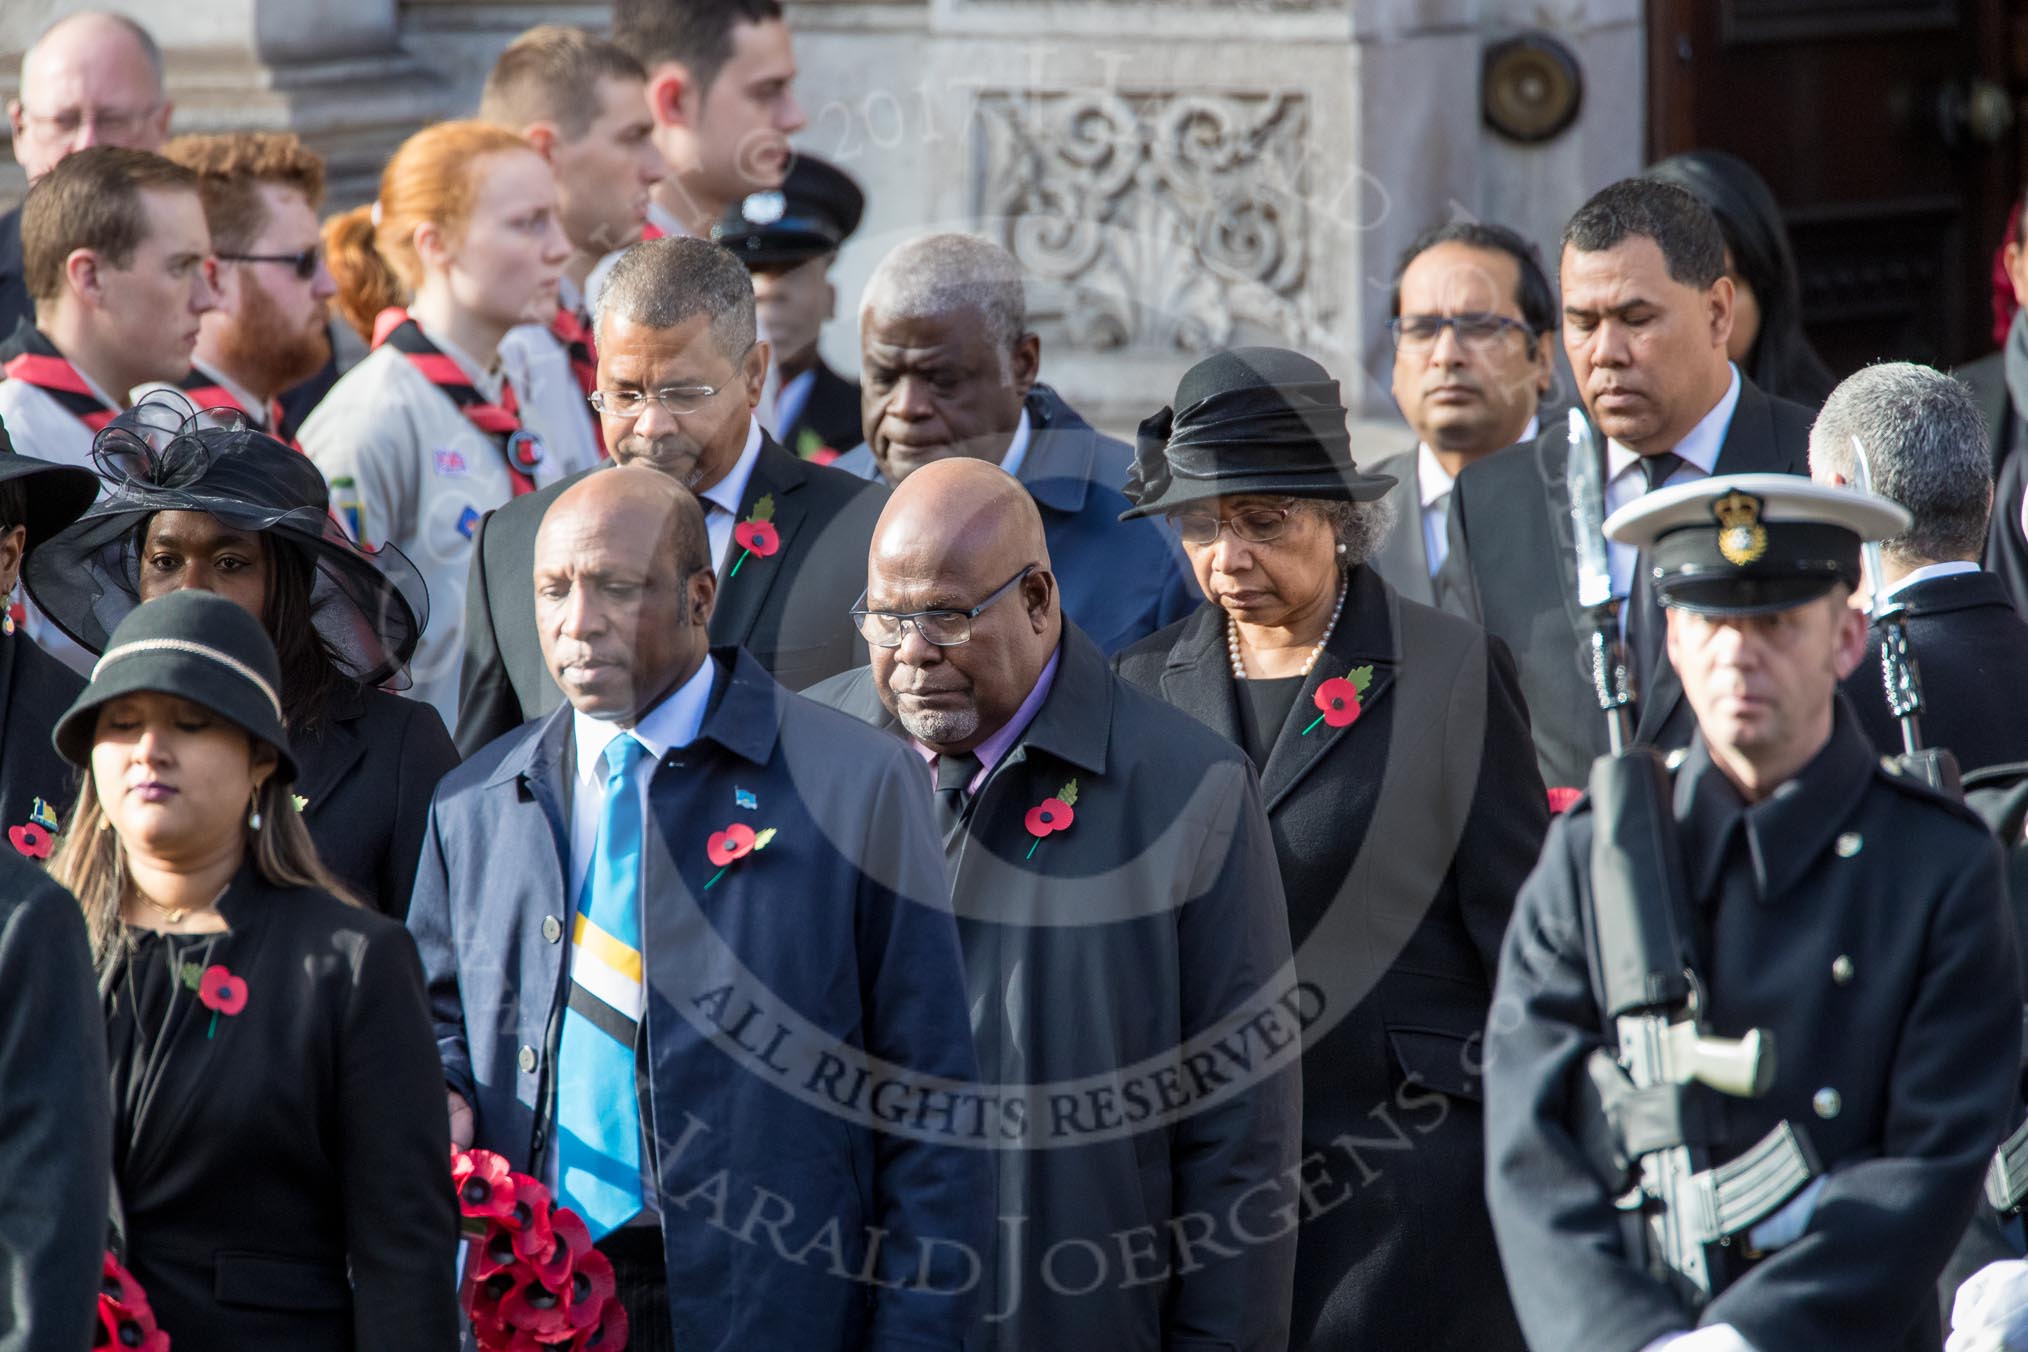 The High Commissioners are leaving the Foreign and Commonwealth Office during the Remembrance Sunday Cenotaph Ceremony 2018 at Horse Guards Parade, Westminster, London, 11 November 2018, 10:56.